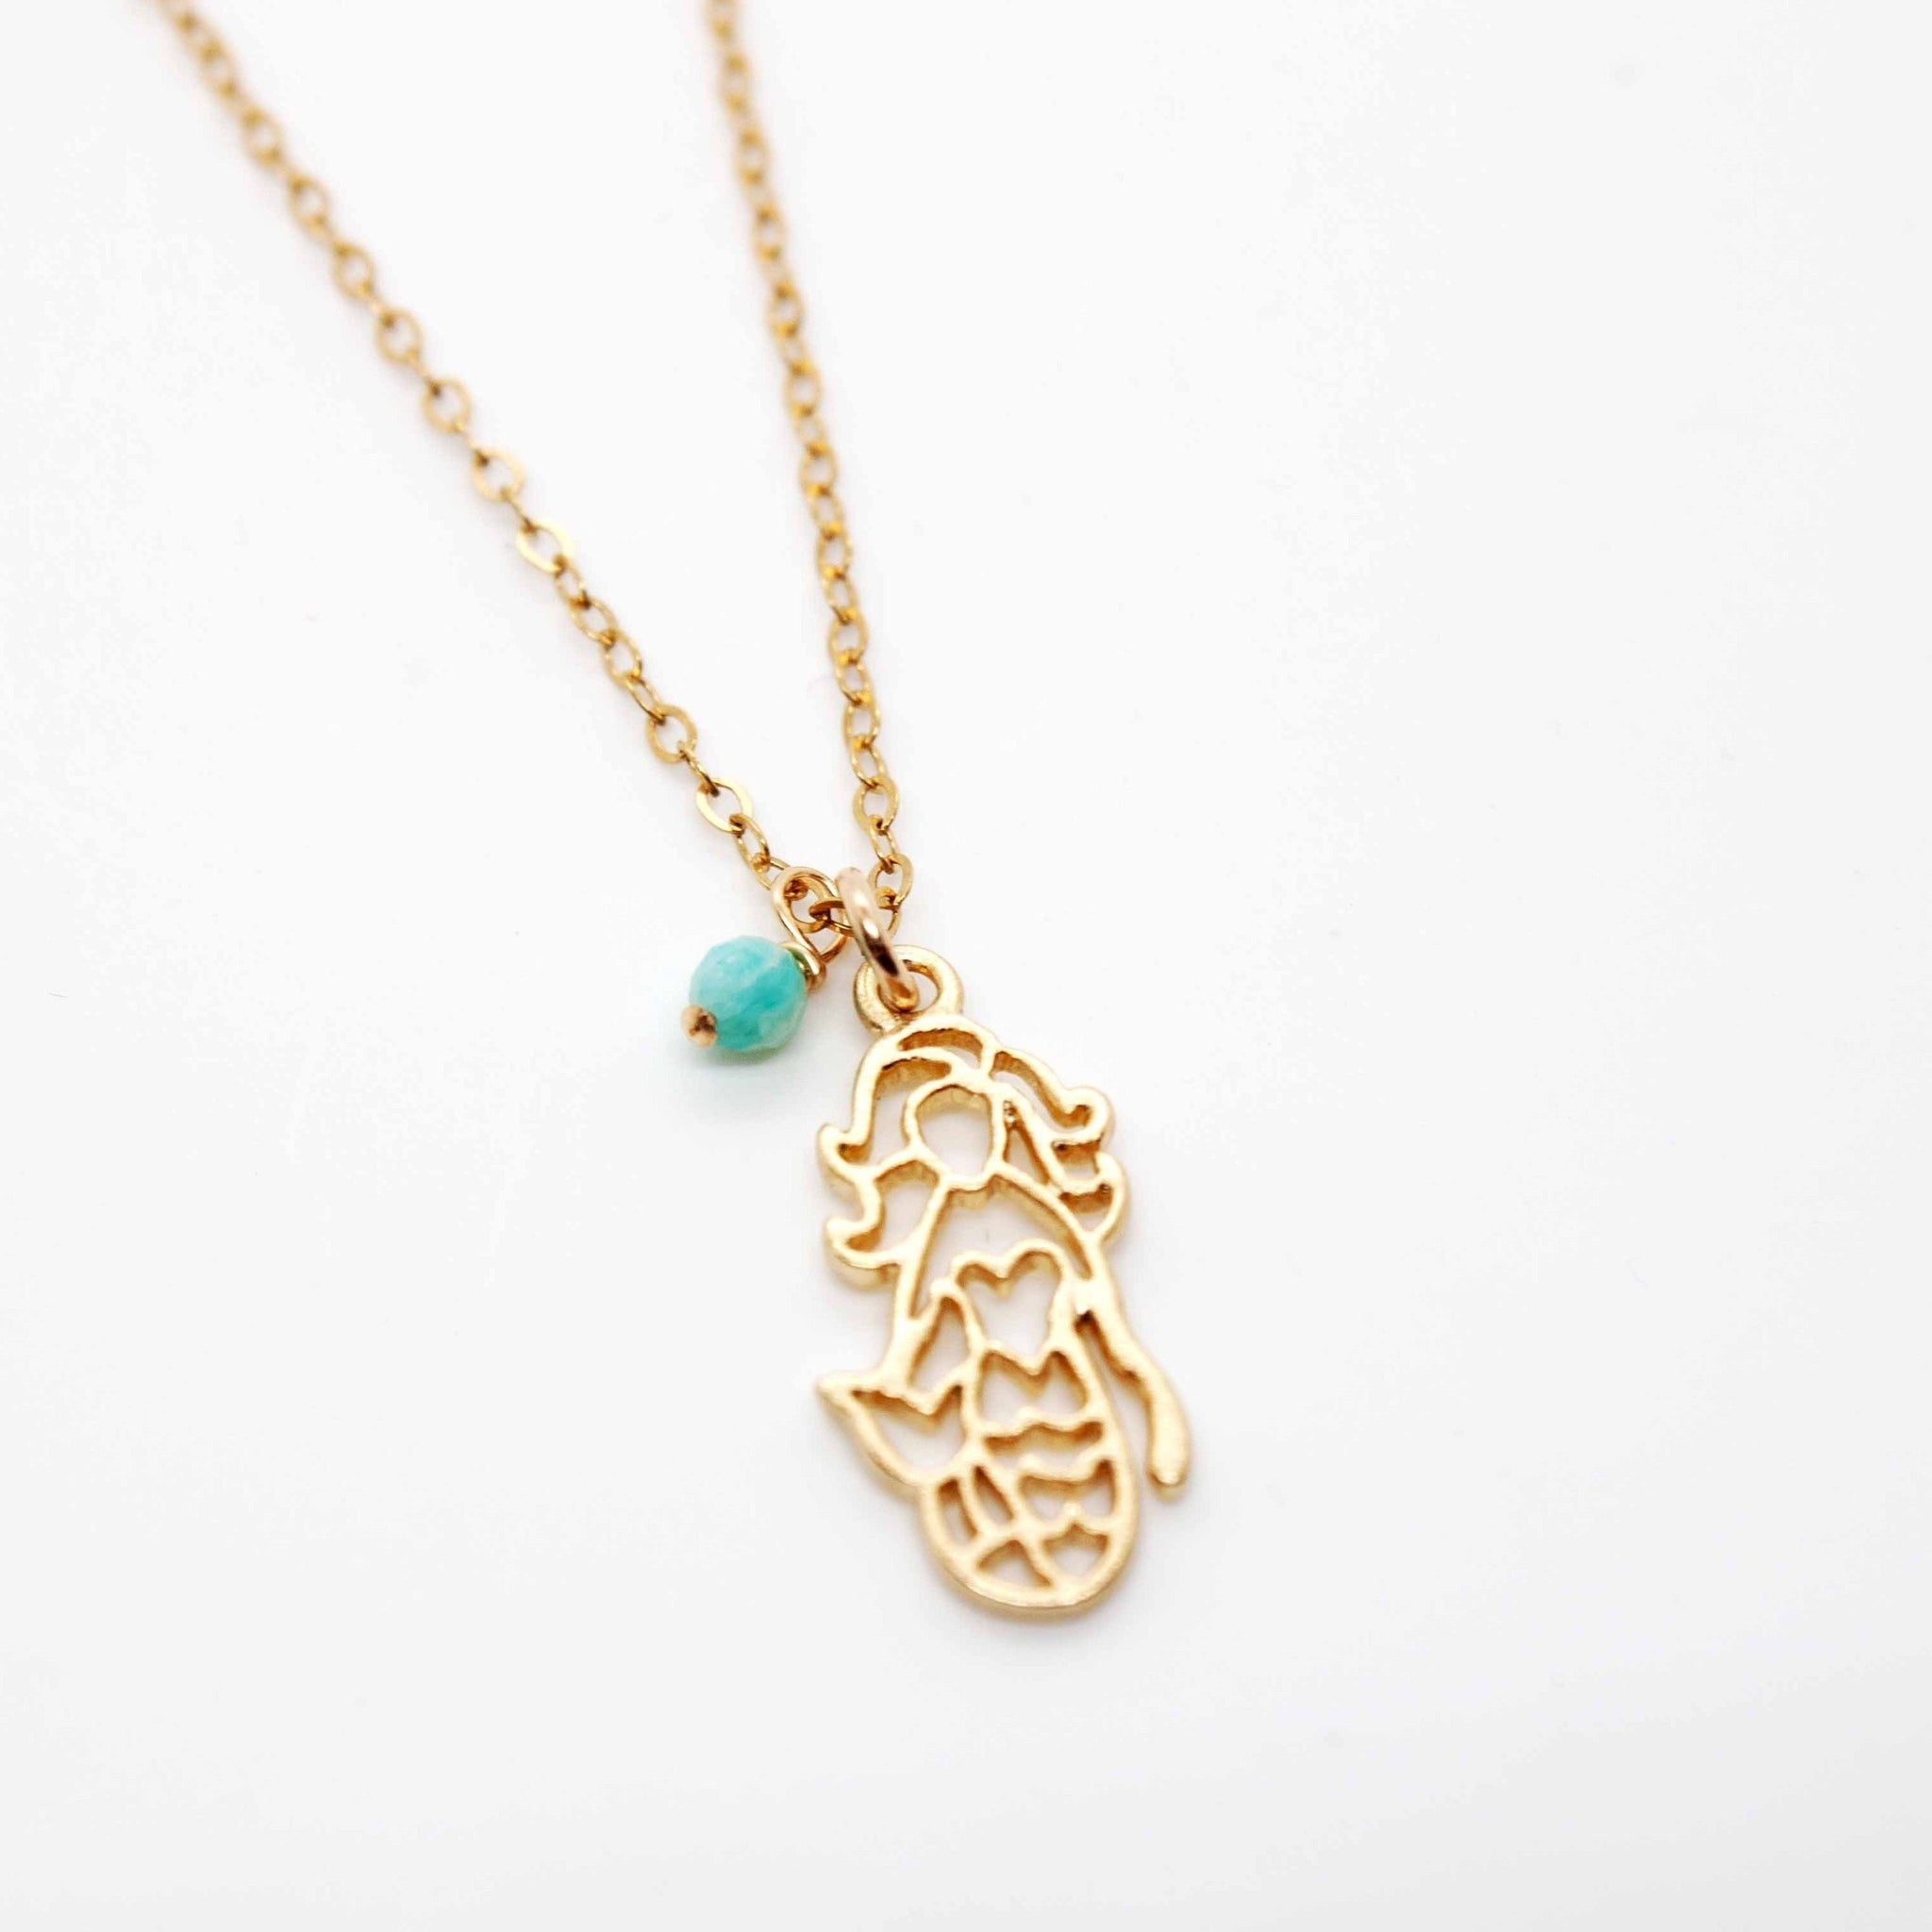 16 inch gold filled* necklace with larimar bead on gold vermeil* mermaid pendant handmade in Toronto by kp jewelry co.